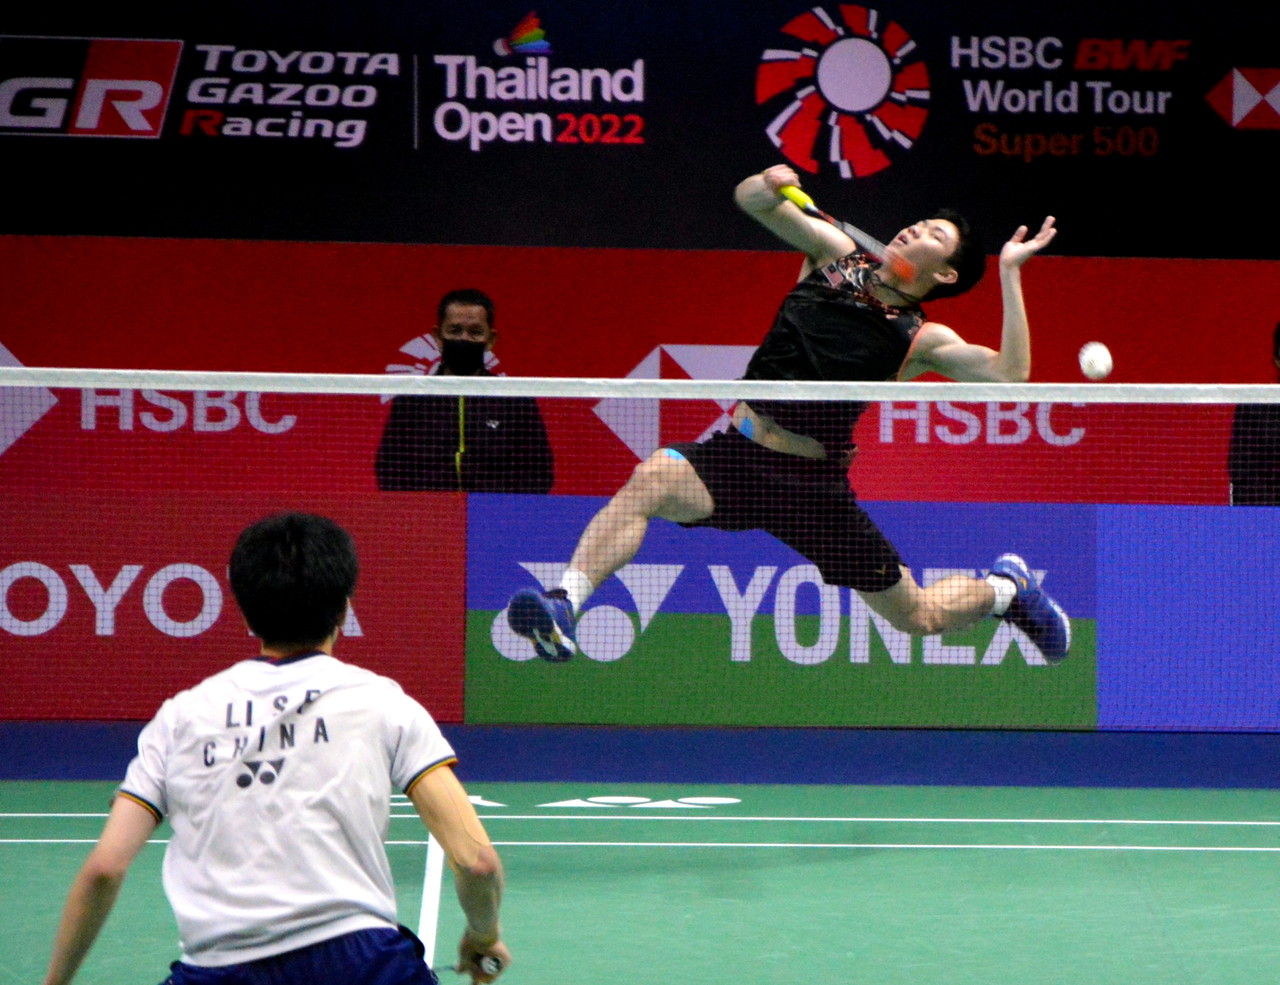 Lee Zii Jia makes remarkable comeback, to win Thailand Open